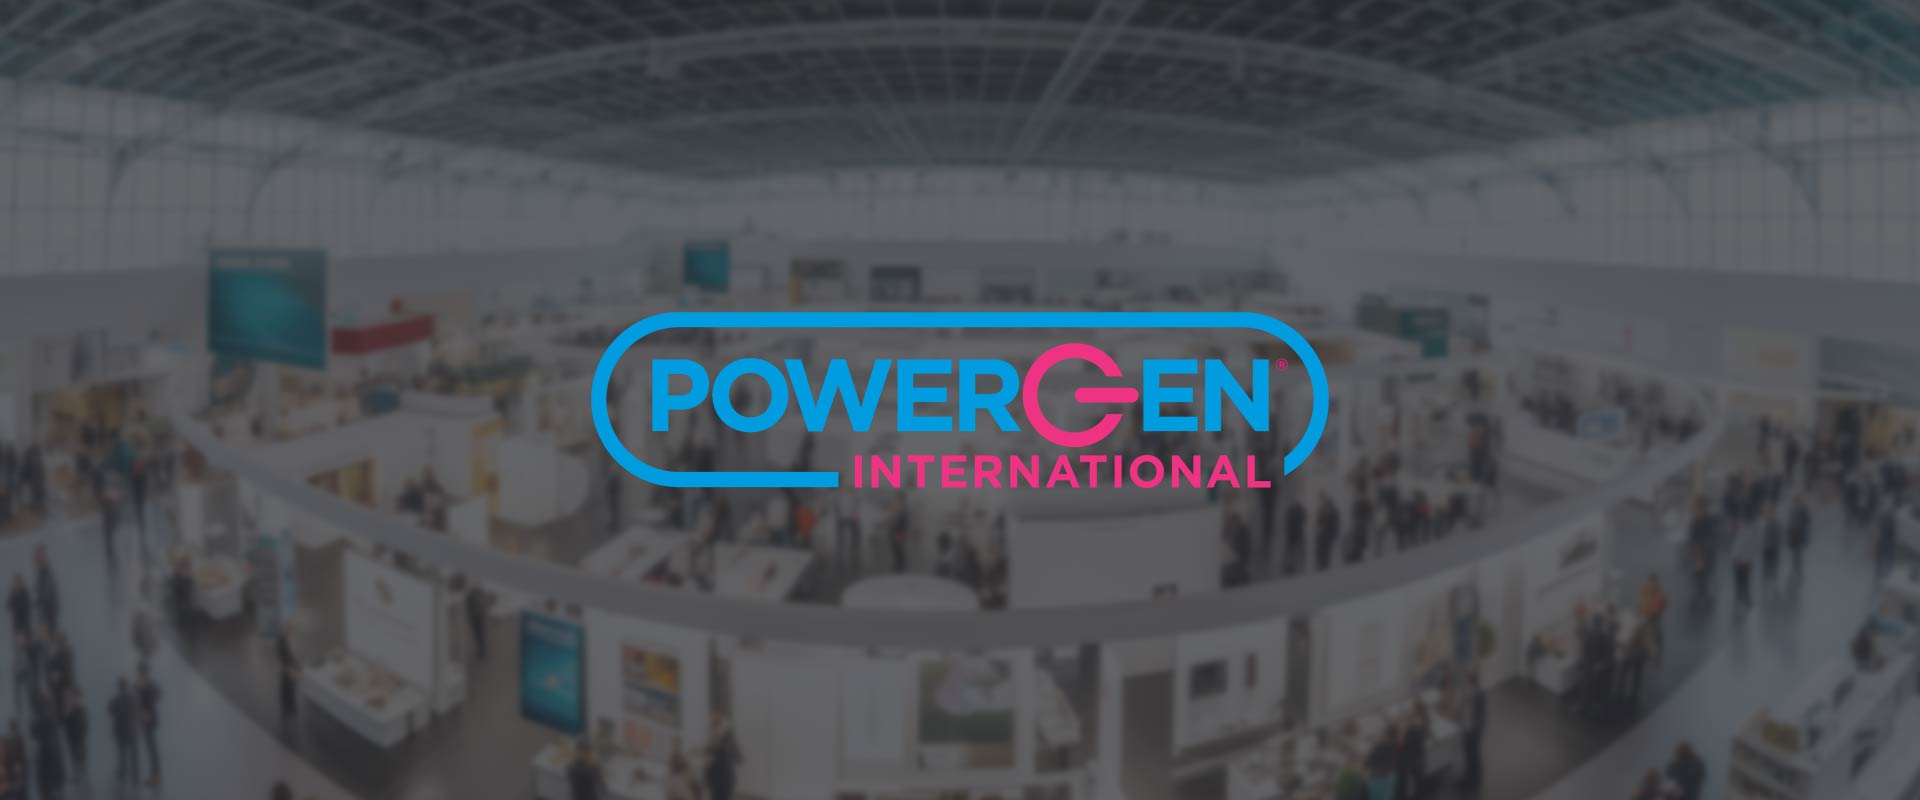 Join us in New Orleans at PowerGen International – Booth #1218